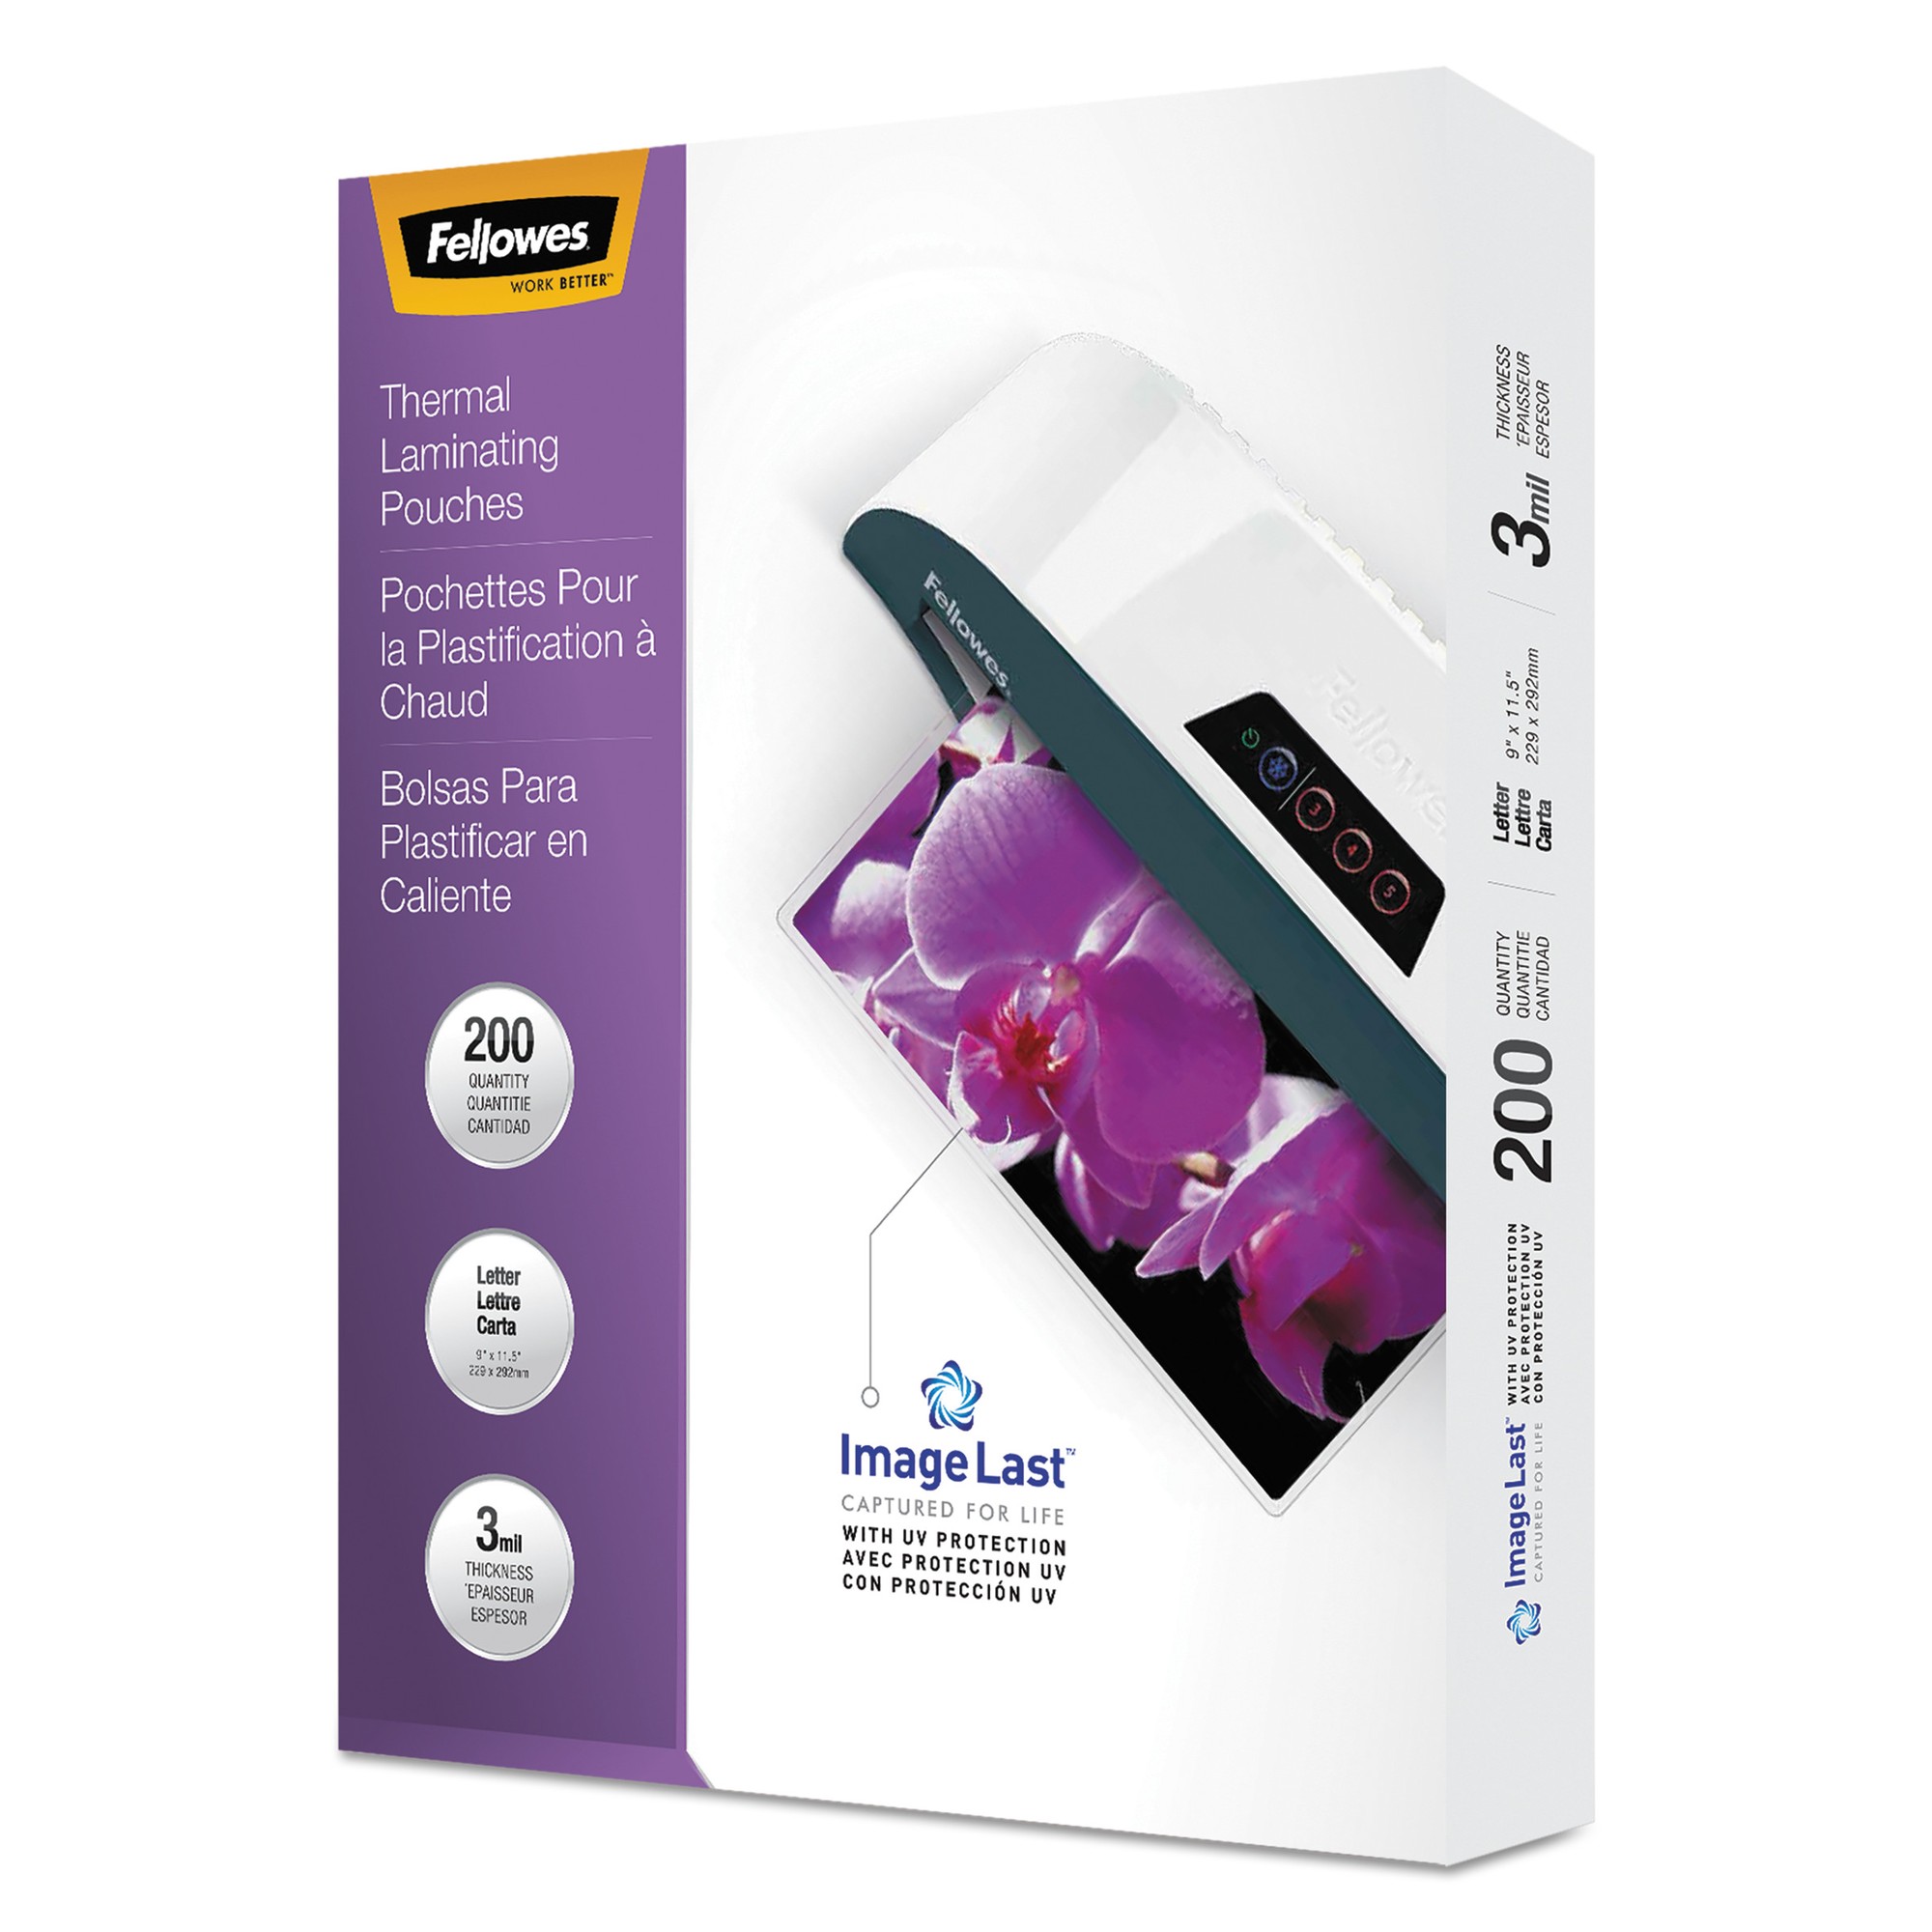 Fellowes ImageLast Jam-Free Thermal Laminating Pouches - Laminating Pouch/Sheet Size: 9" Width x 3 mil Thickness - UV Resistant